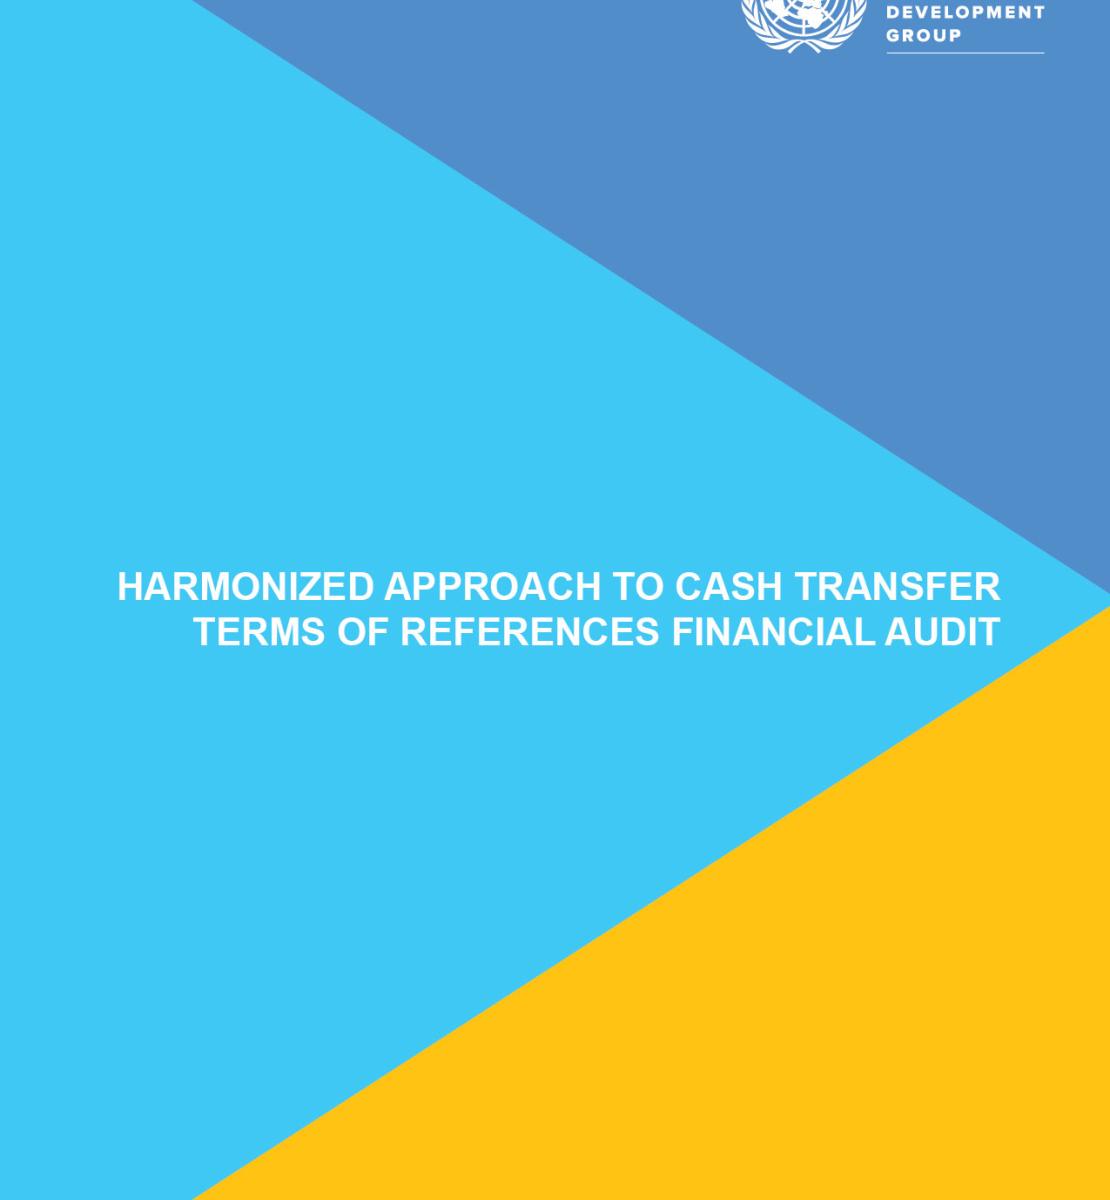 Harmonized Approach to Cash Transfer - Terms of References Financial Audit